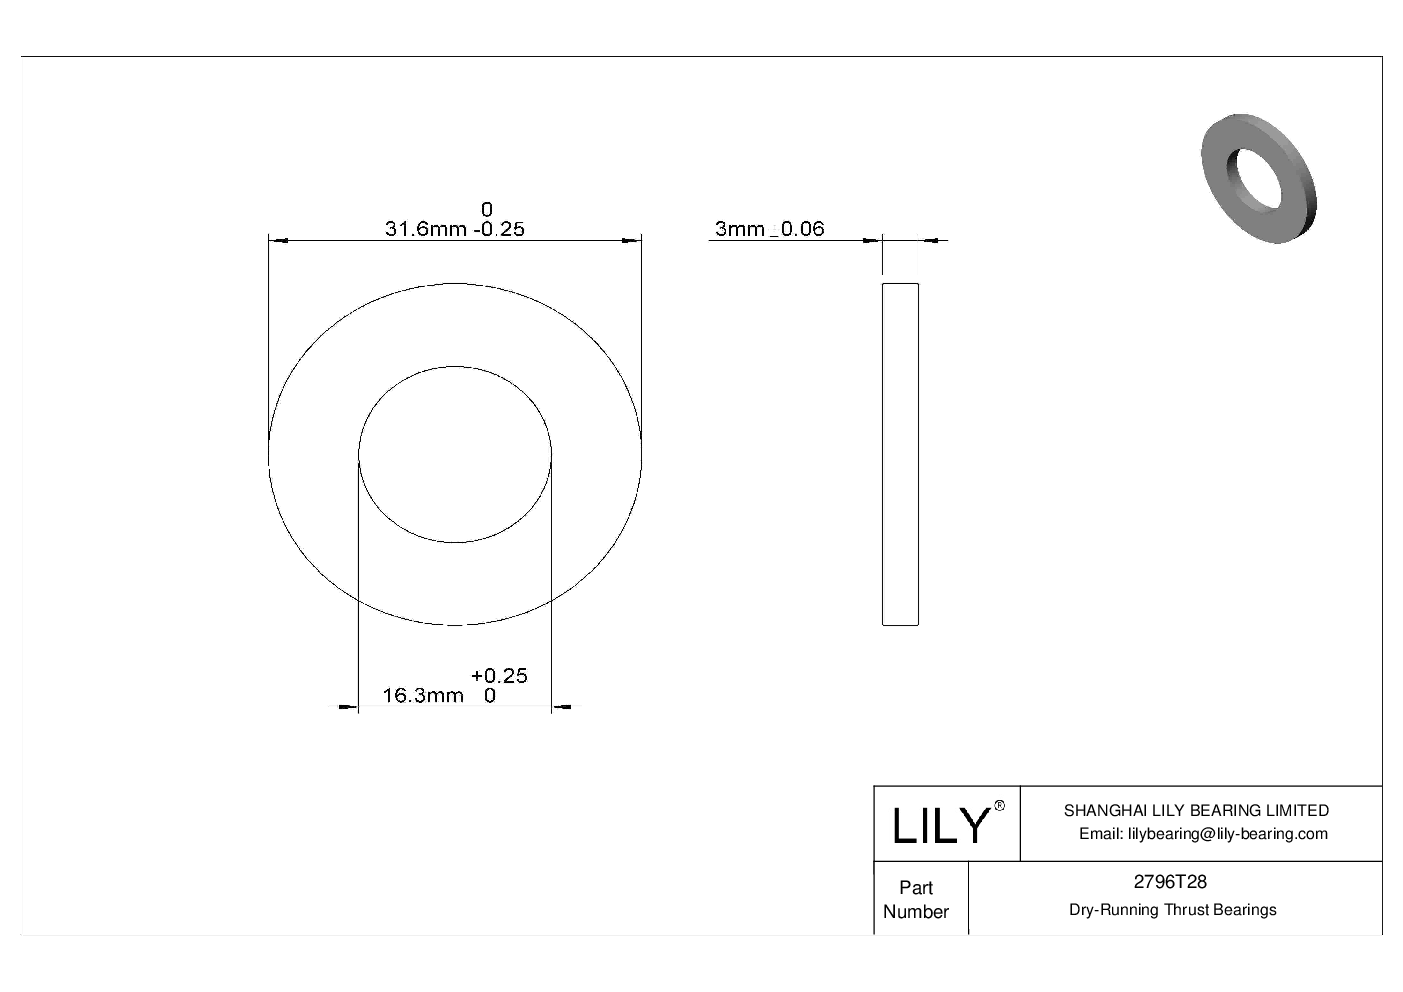 CHJGTCI Ultra-Low-Friction Dry-Running Thrust Bearings cad drawing